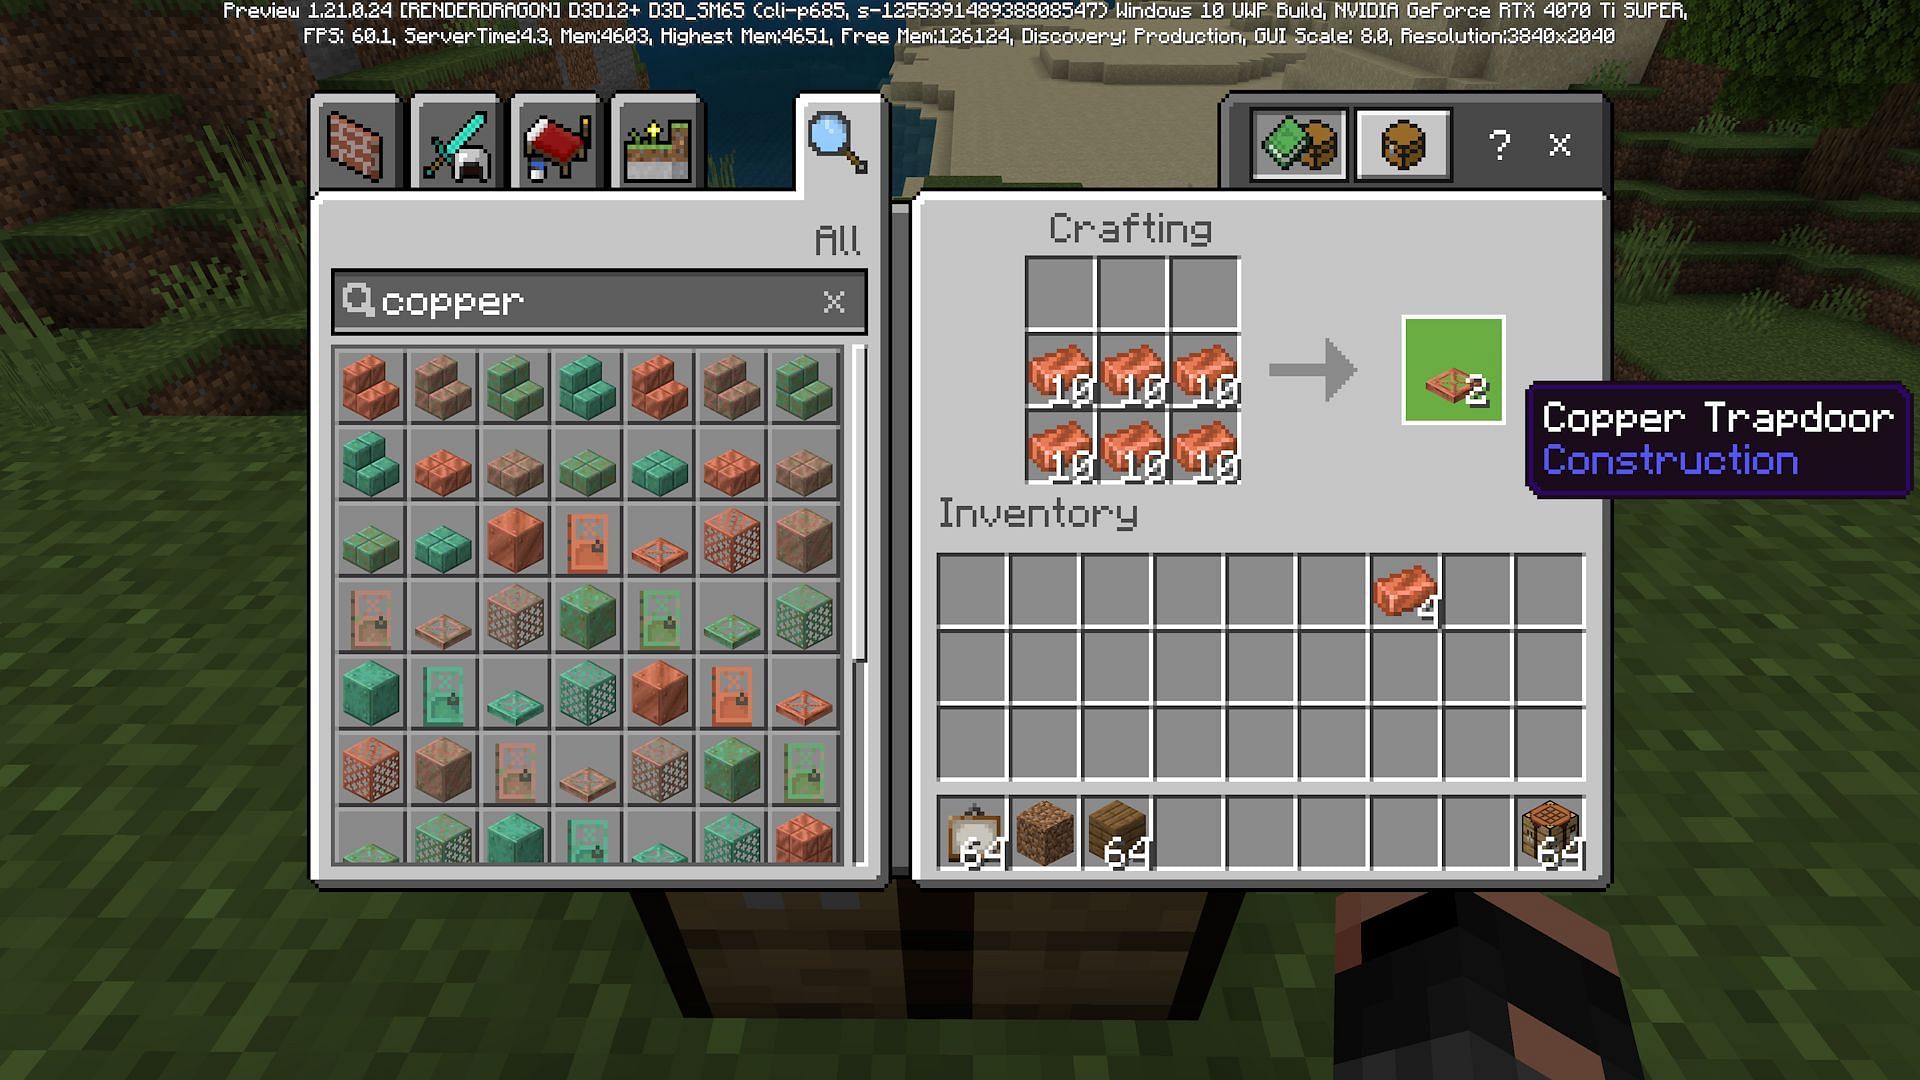 Thankfully, copper doors and trapdoors are much more reasonably priced now (Image via Mojang)